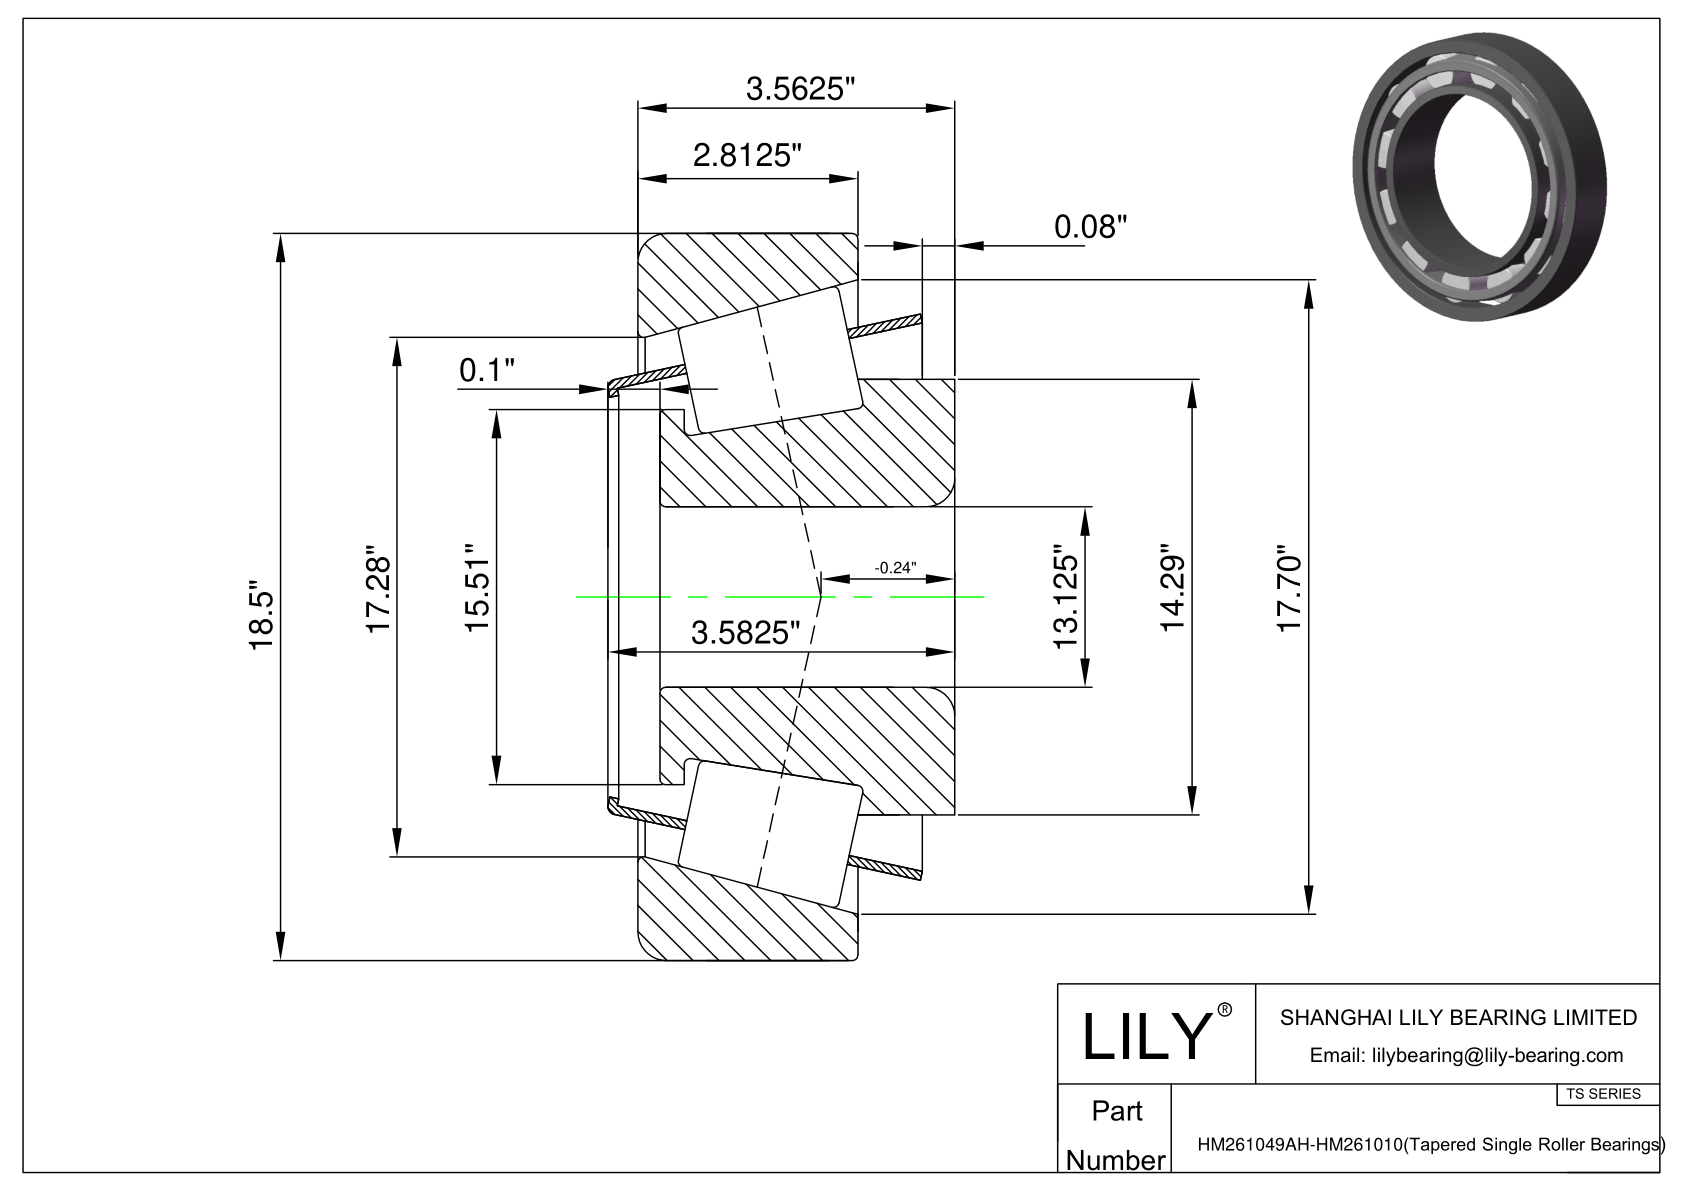 HM261049AH-HM261010 TS (Tapered Single Roller Bearings) (Imperial) cad drawing